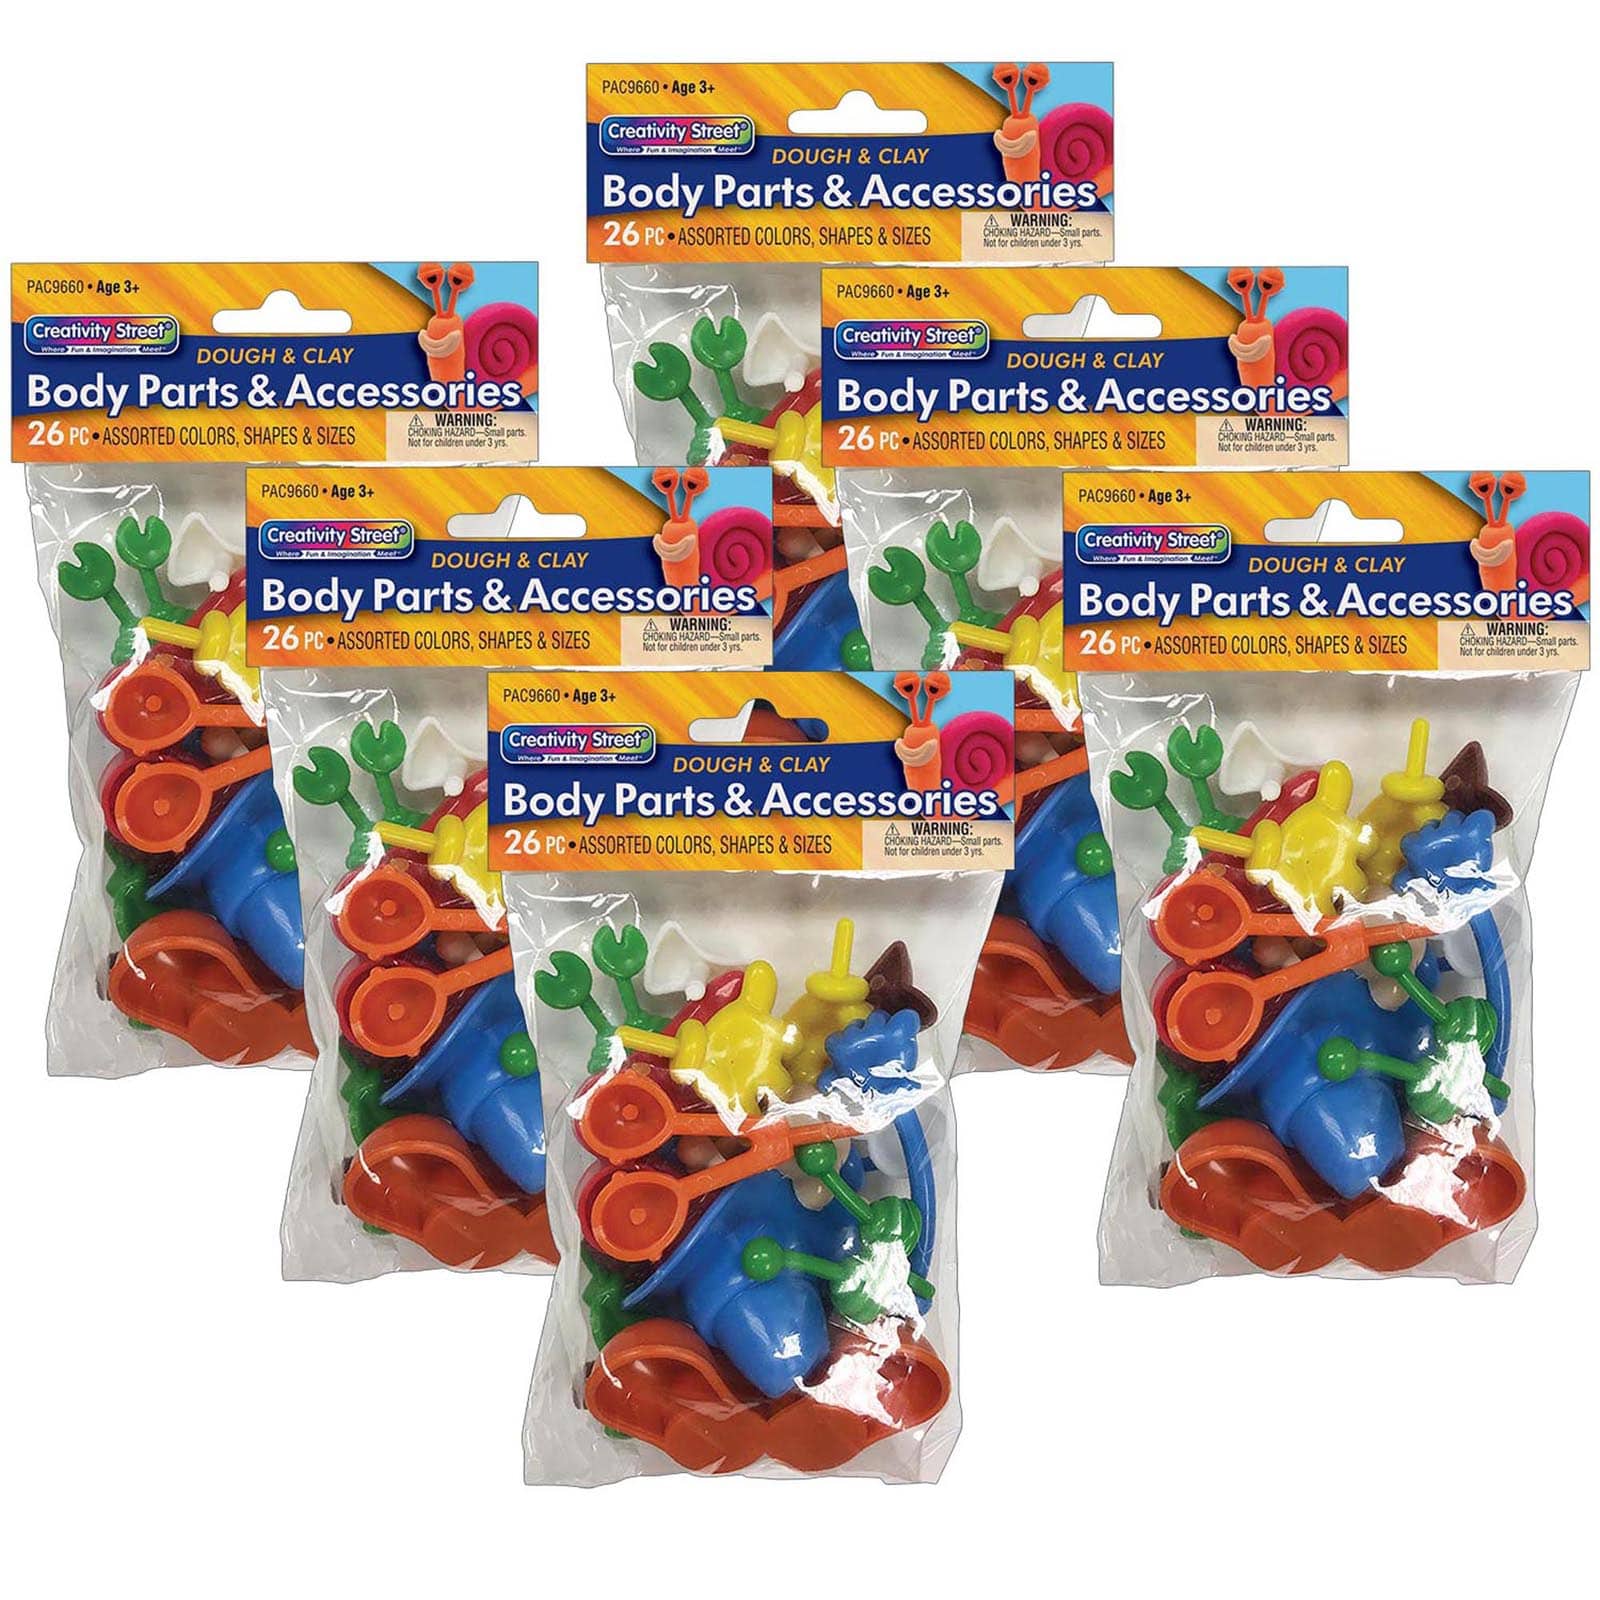 24 ct. Modeling Clay - Reusable Clay